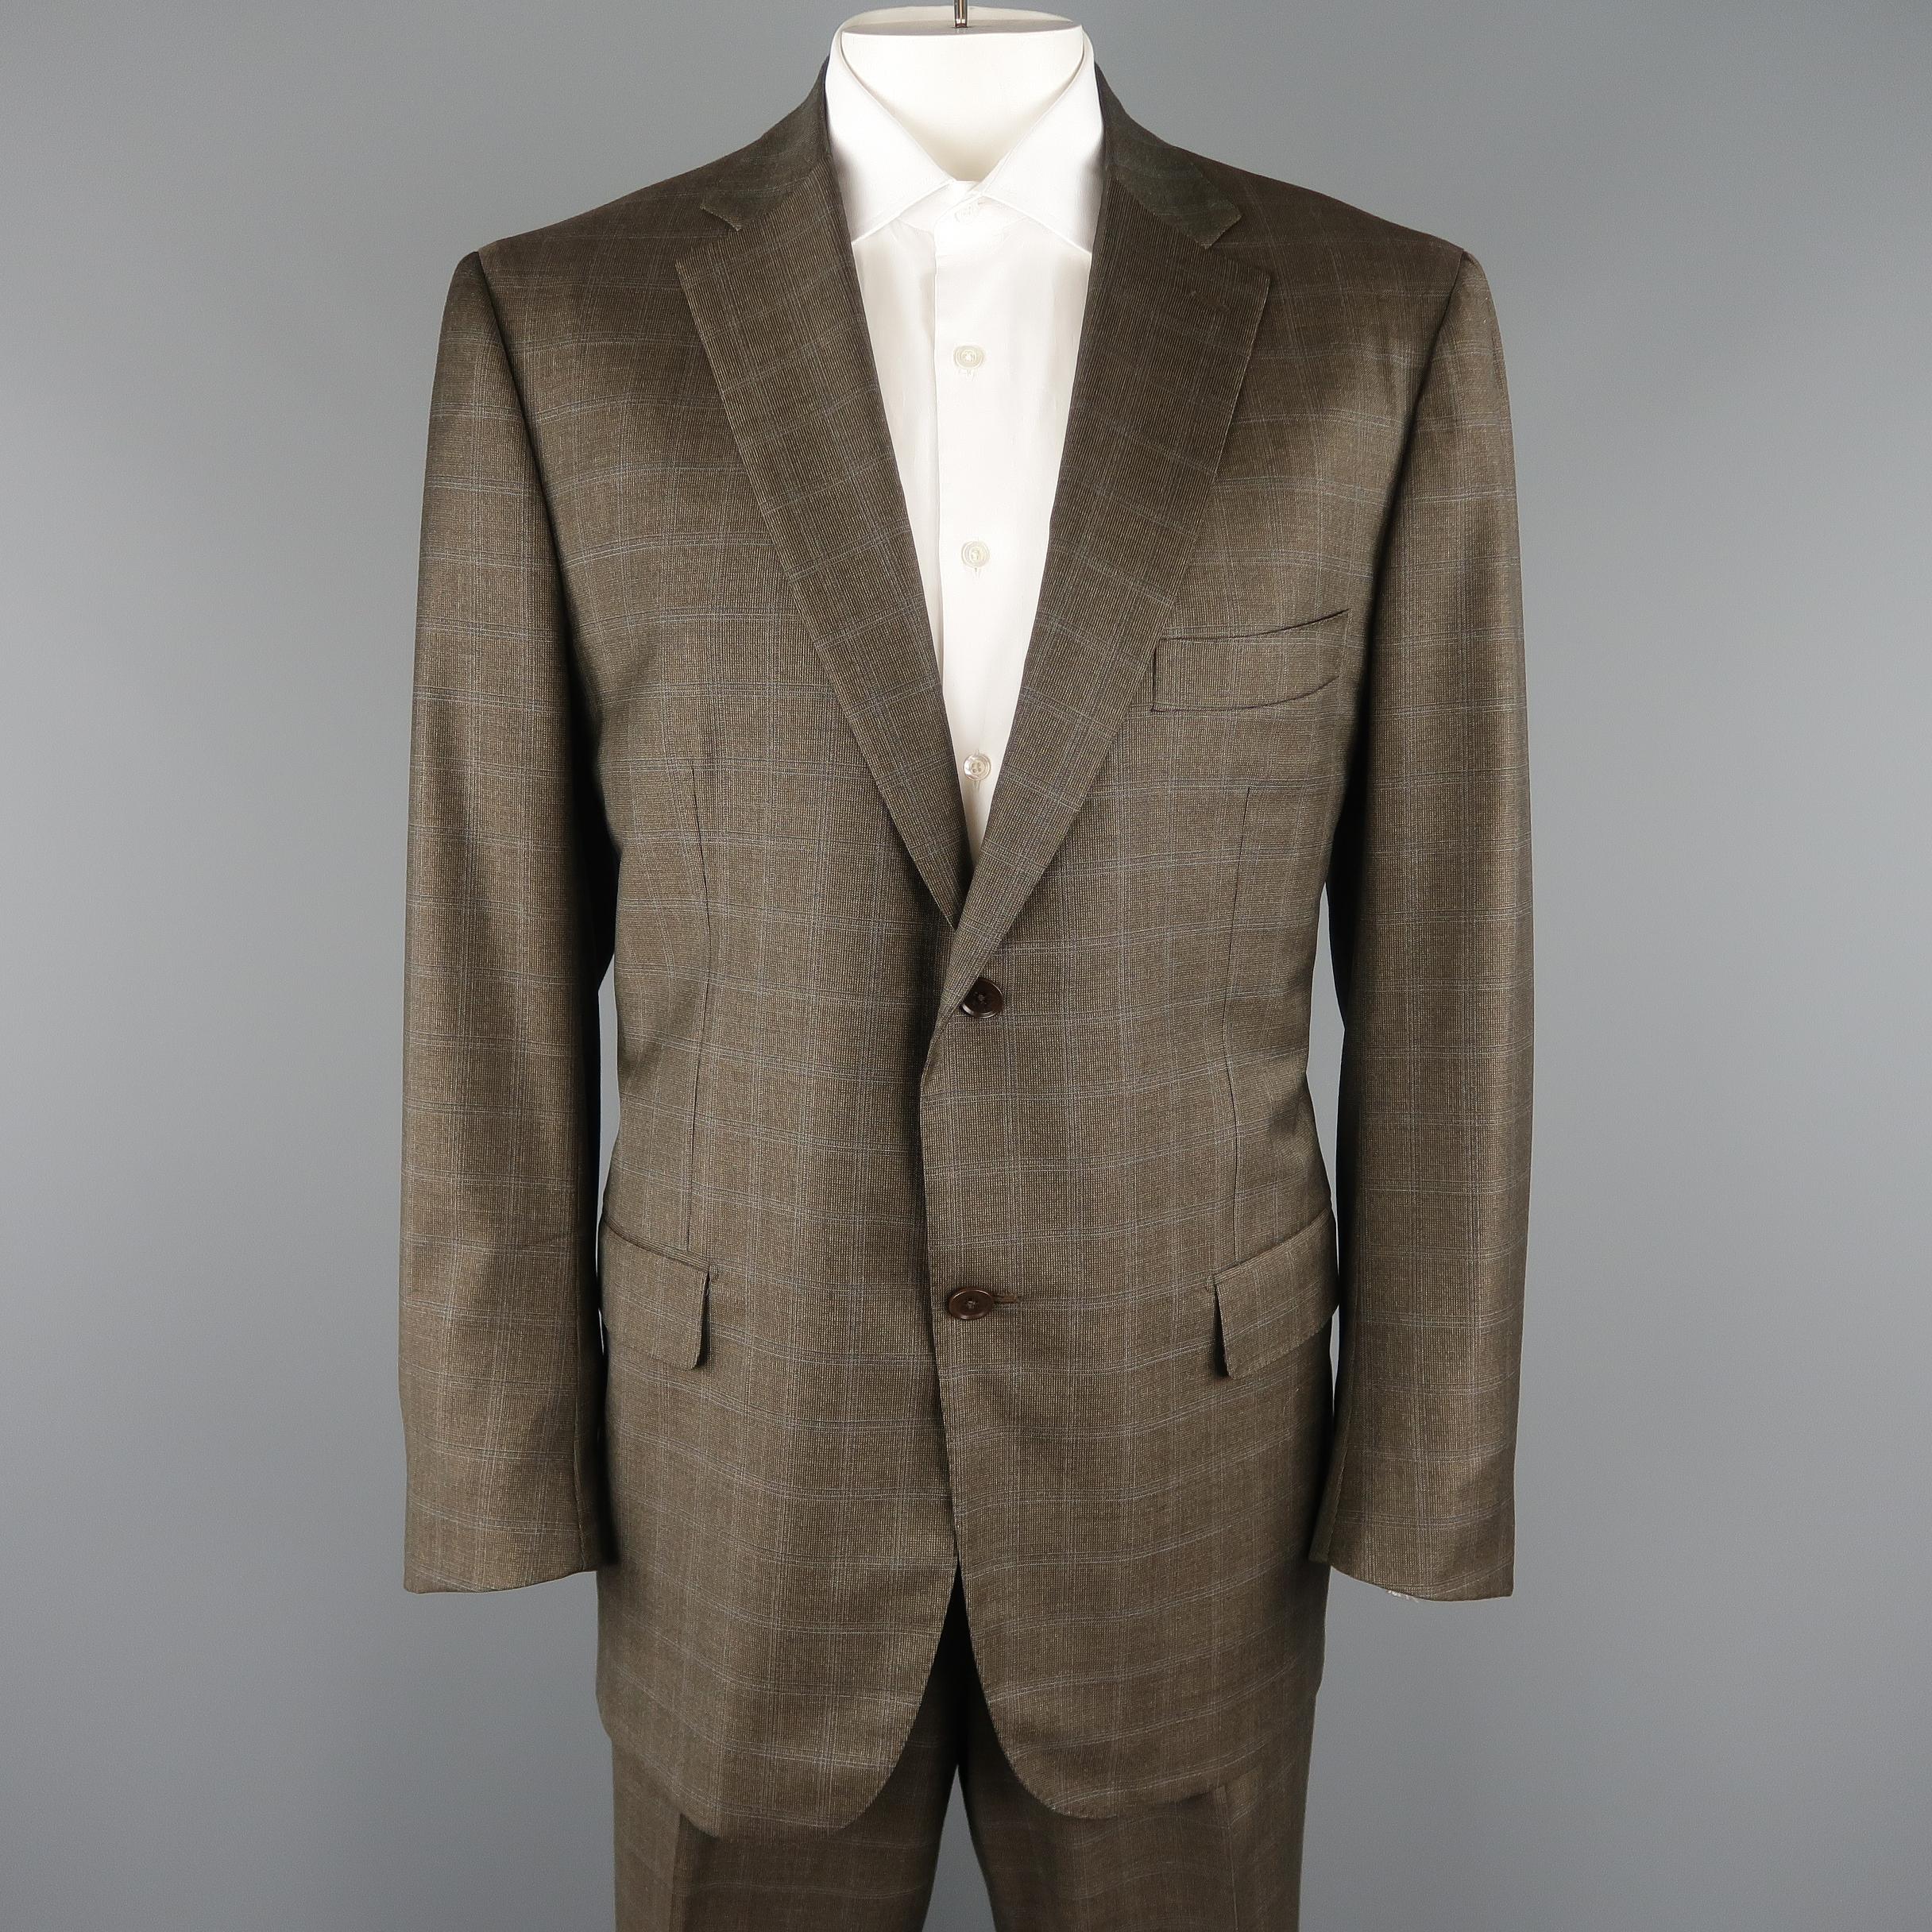 ISAIA two piece suit comes in brown windowpane wool and includes a single breasted two button, notch lapel, sport coat with functional button cuffs with matching flat front trousers. 

Made in Italy.
Original Price: $3,795.00
Excellent Pre-Owned